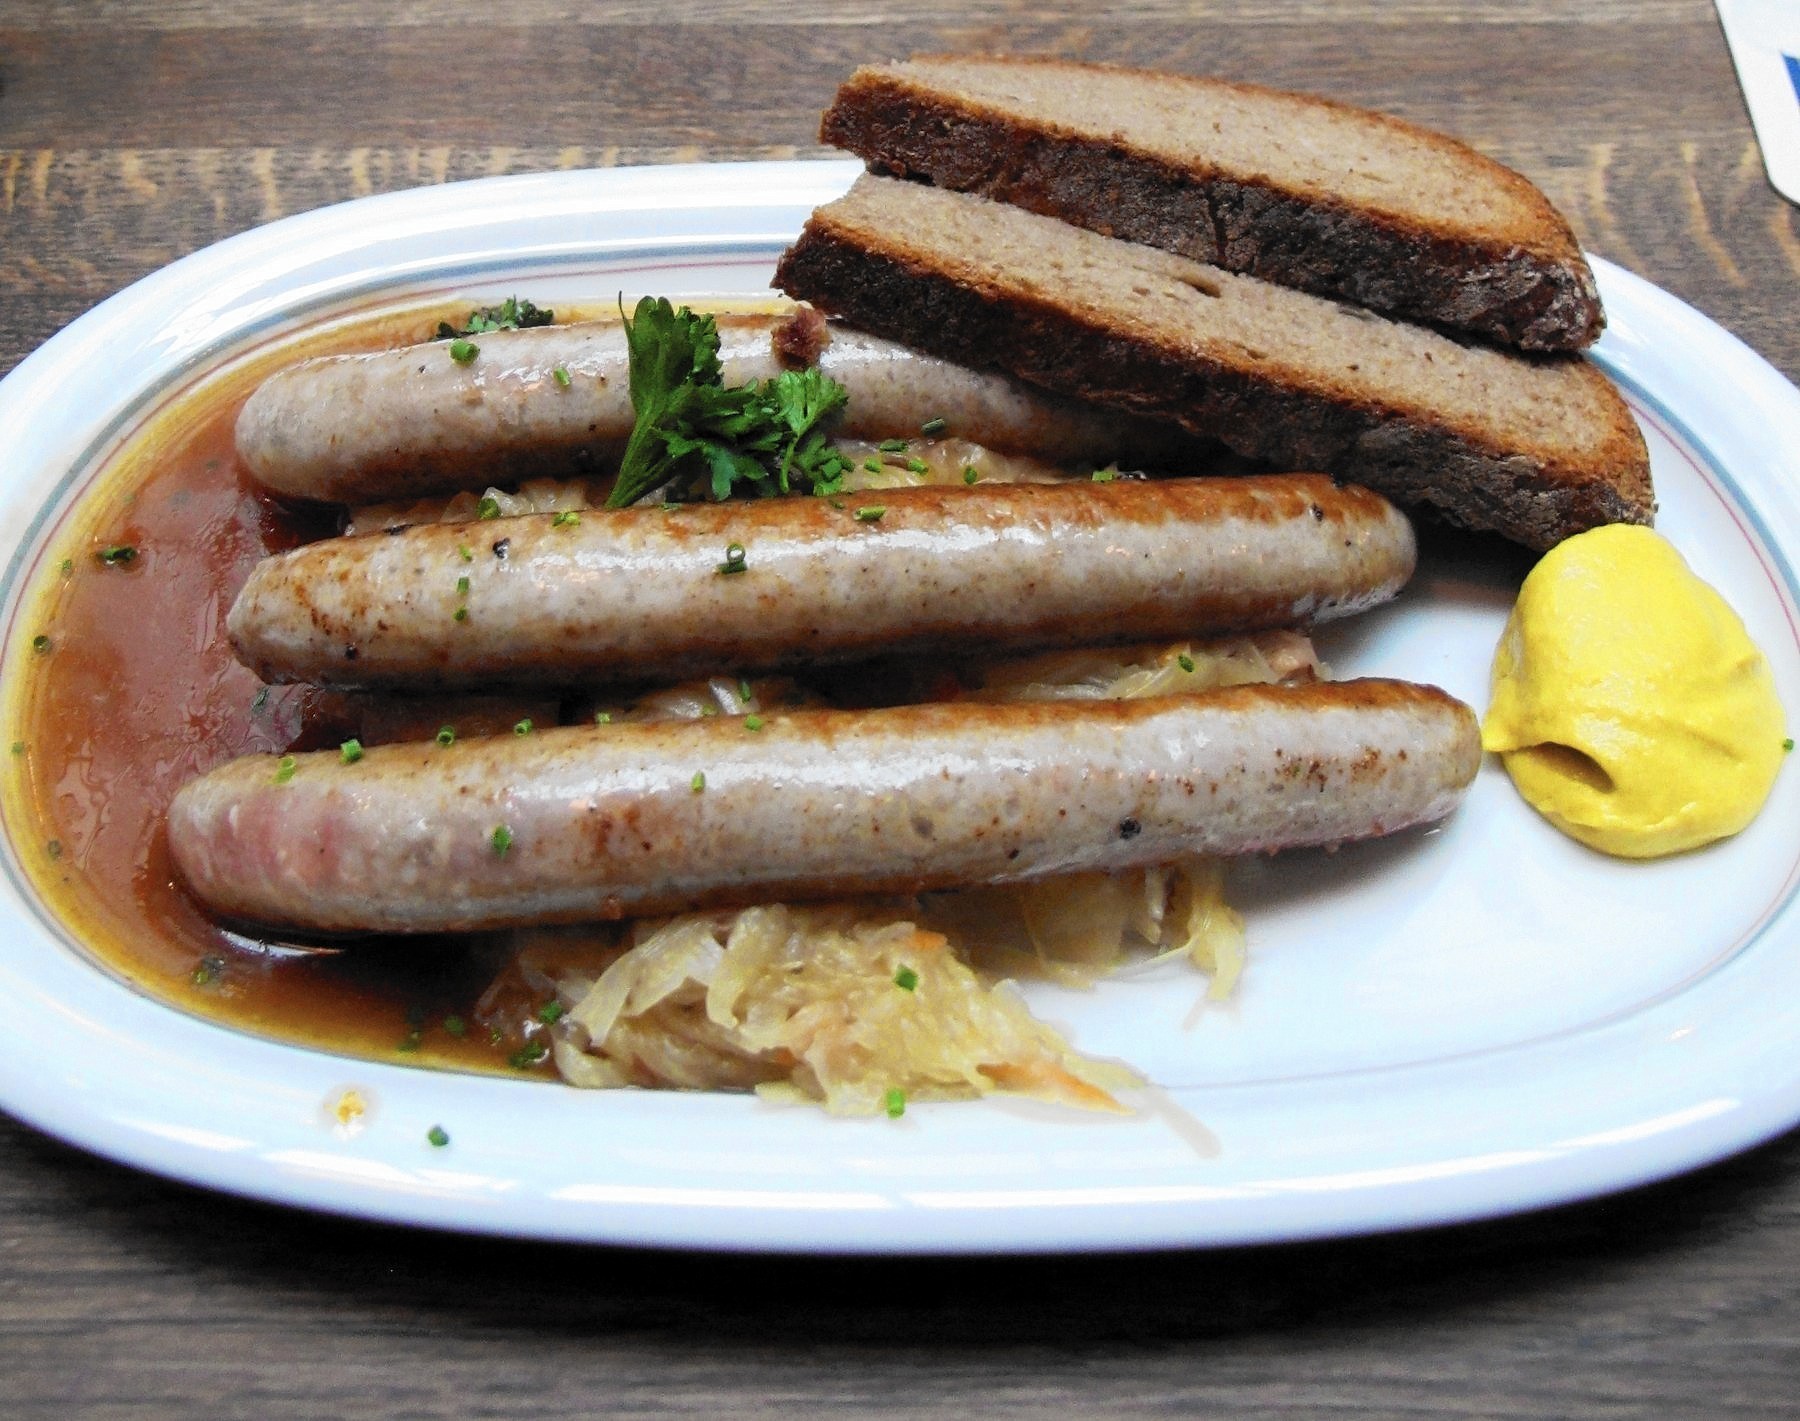 In Nuremberg, bratwurst is an institution, and now a museum exhibit ...